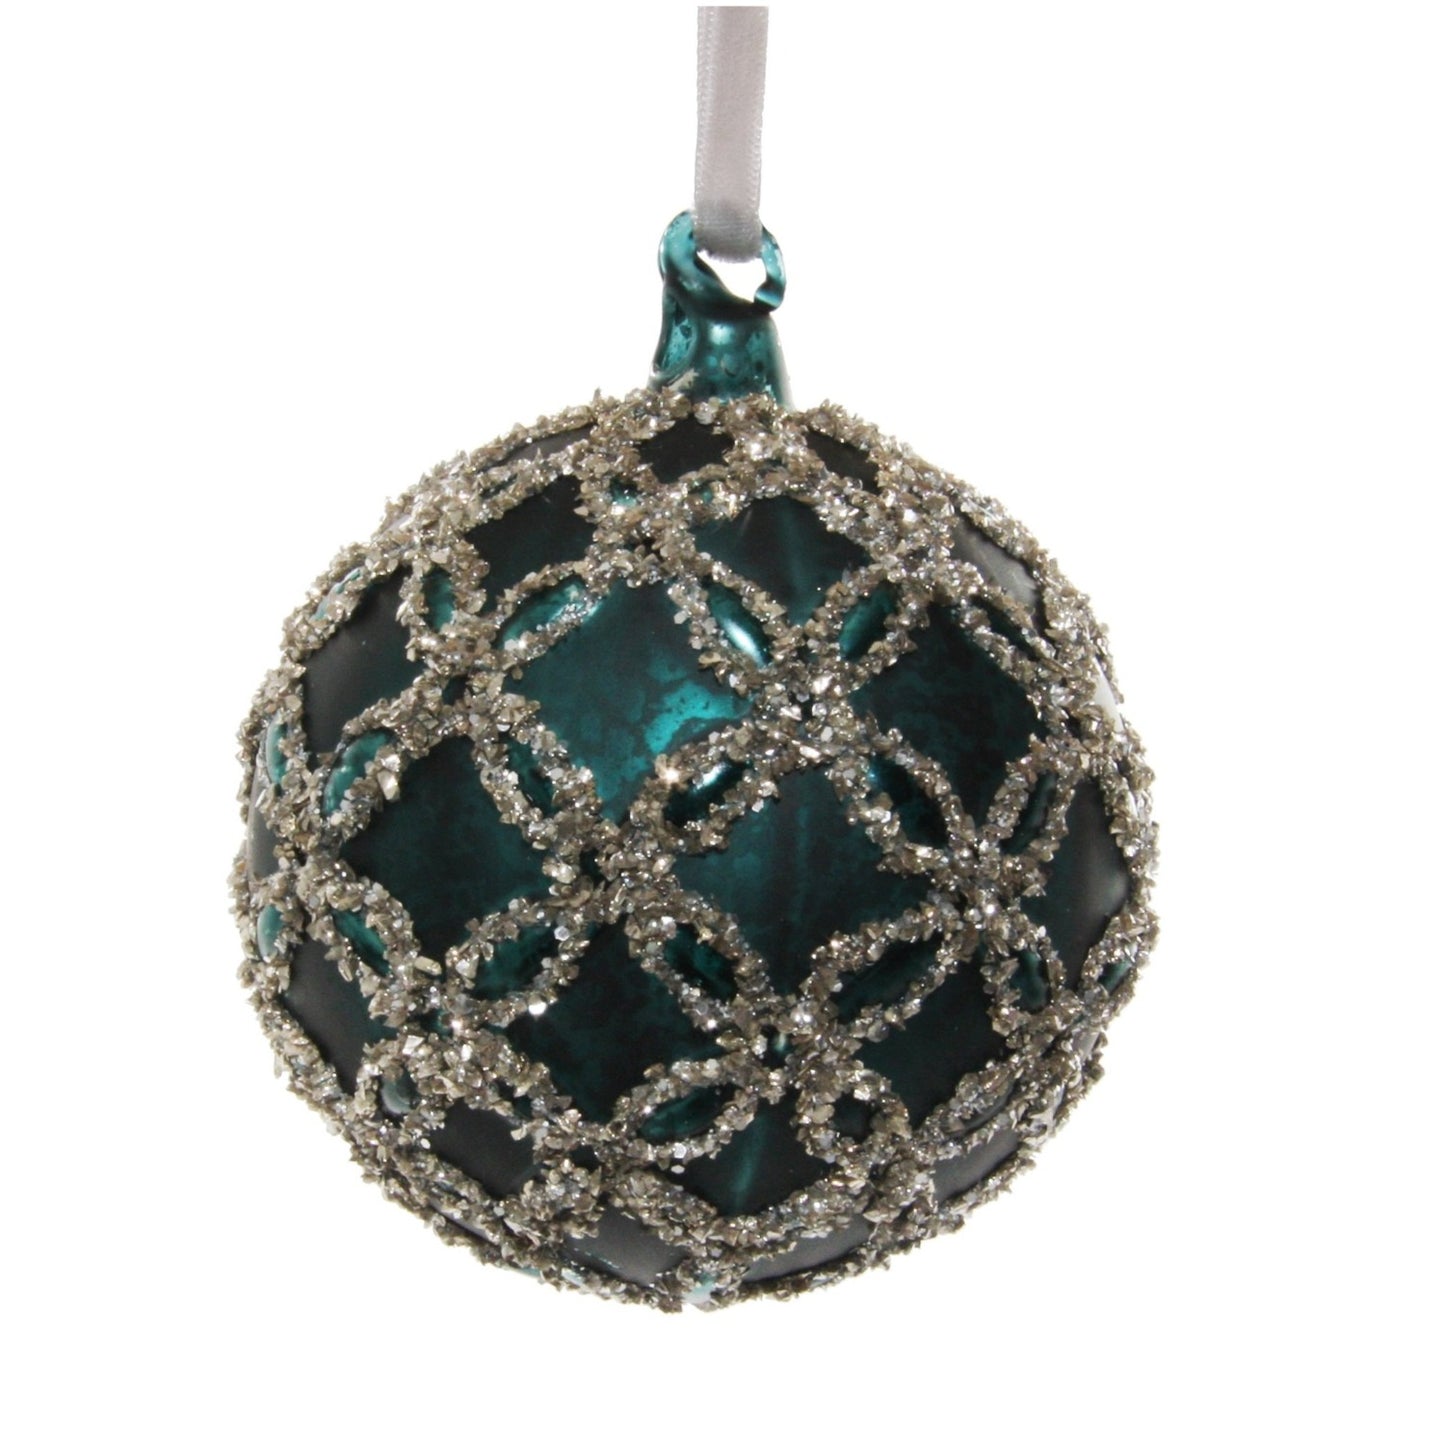 Shishi Blue-Green Glass Silver Glitter Ball Set of 6  Browse our beautiful range of luxury festive Christmas tree decorations, baubles & ornaments for your tree this Christmas.